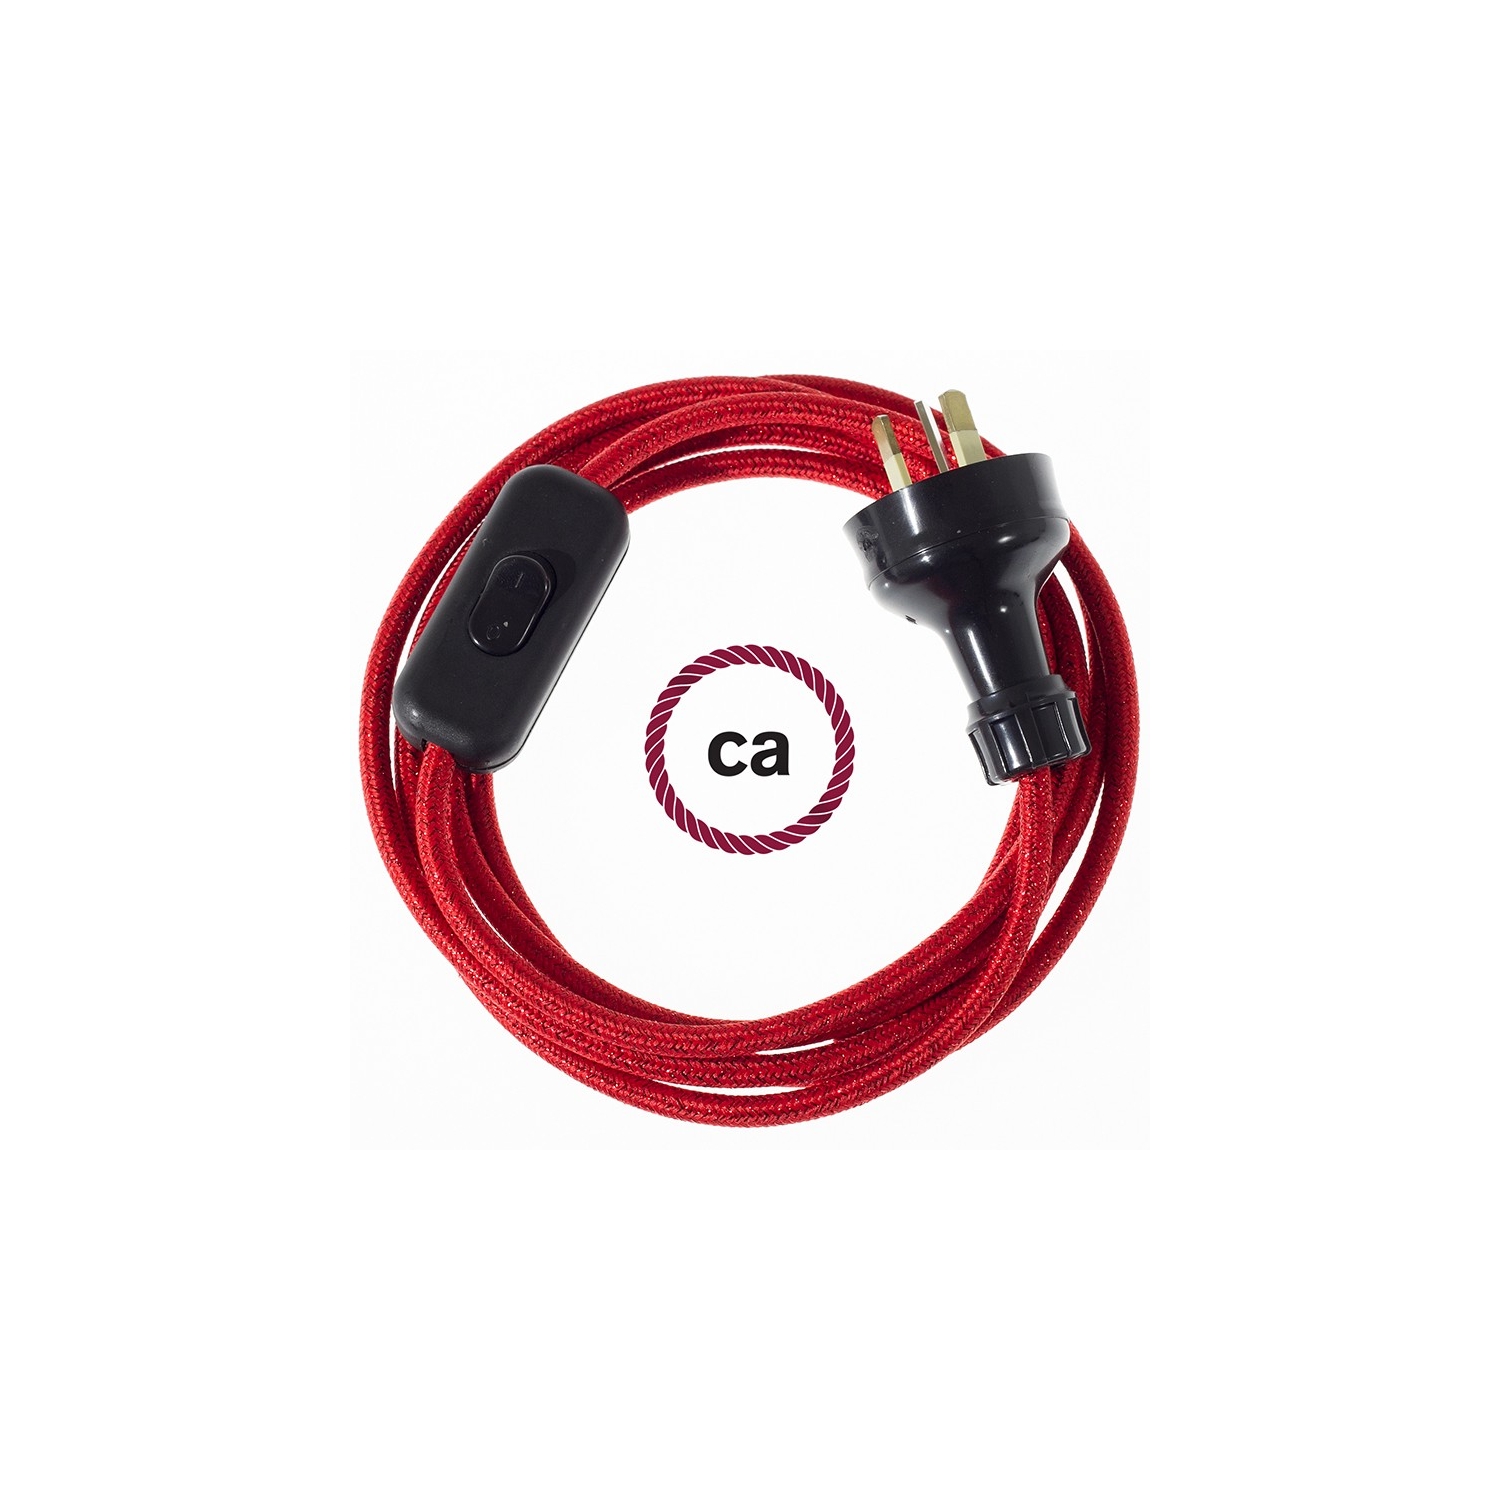 Wiring Glittering Red textile cable RL09 - 1.80 mt